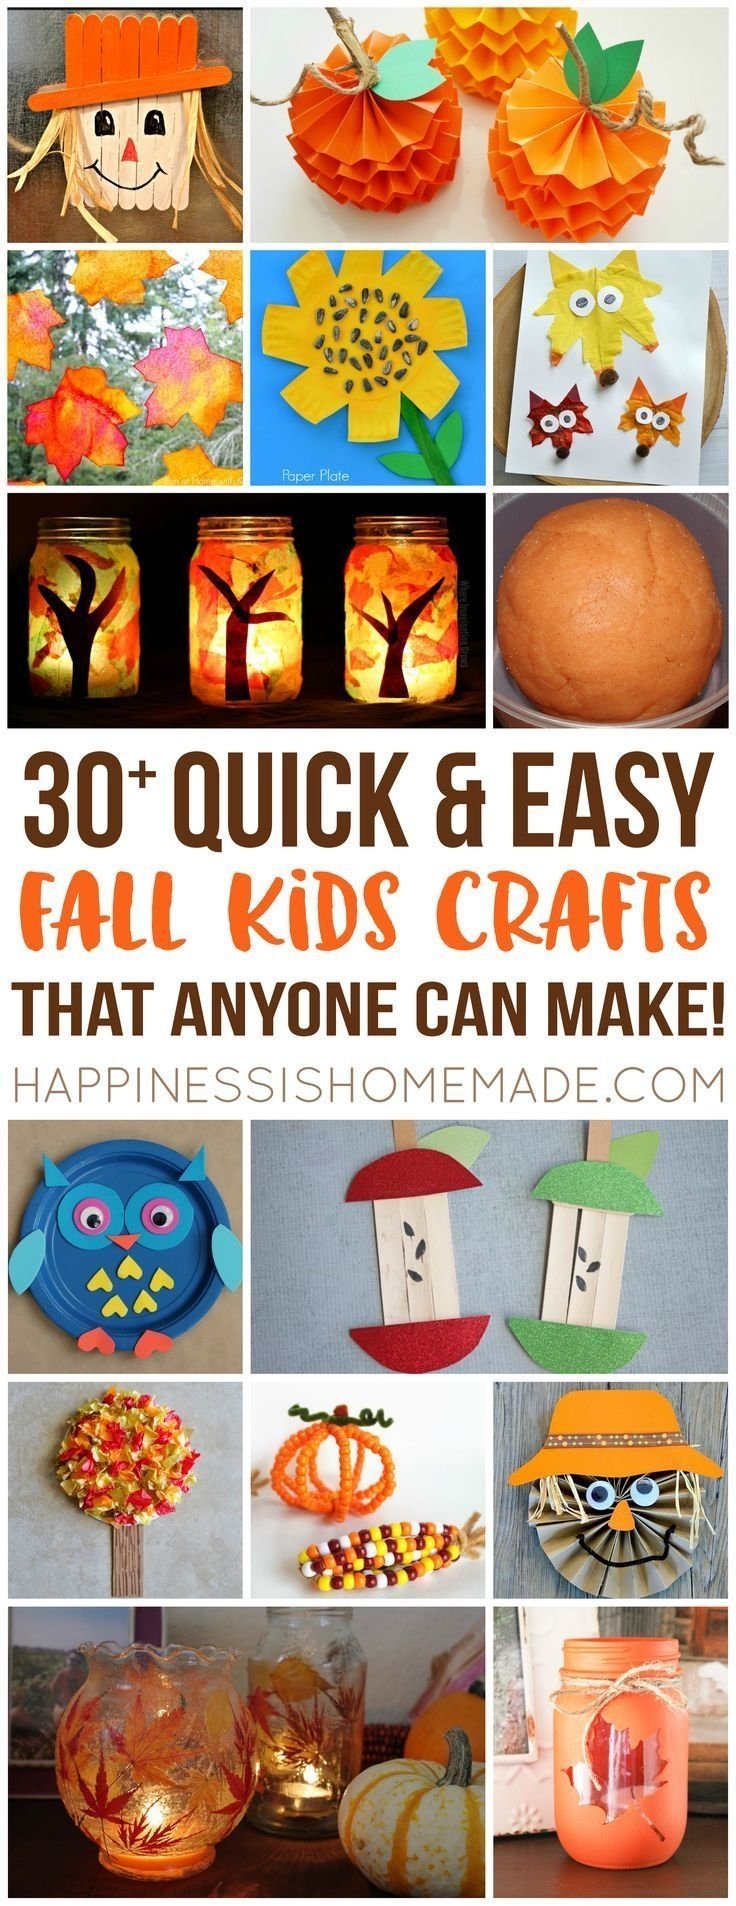 10 Cute Fall Party Ideas For Kids 2407 best fall images on pinterest activities autumn and day care 2022